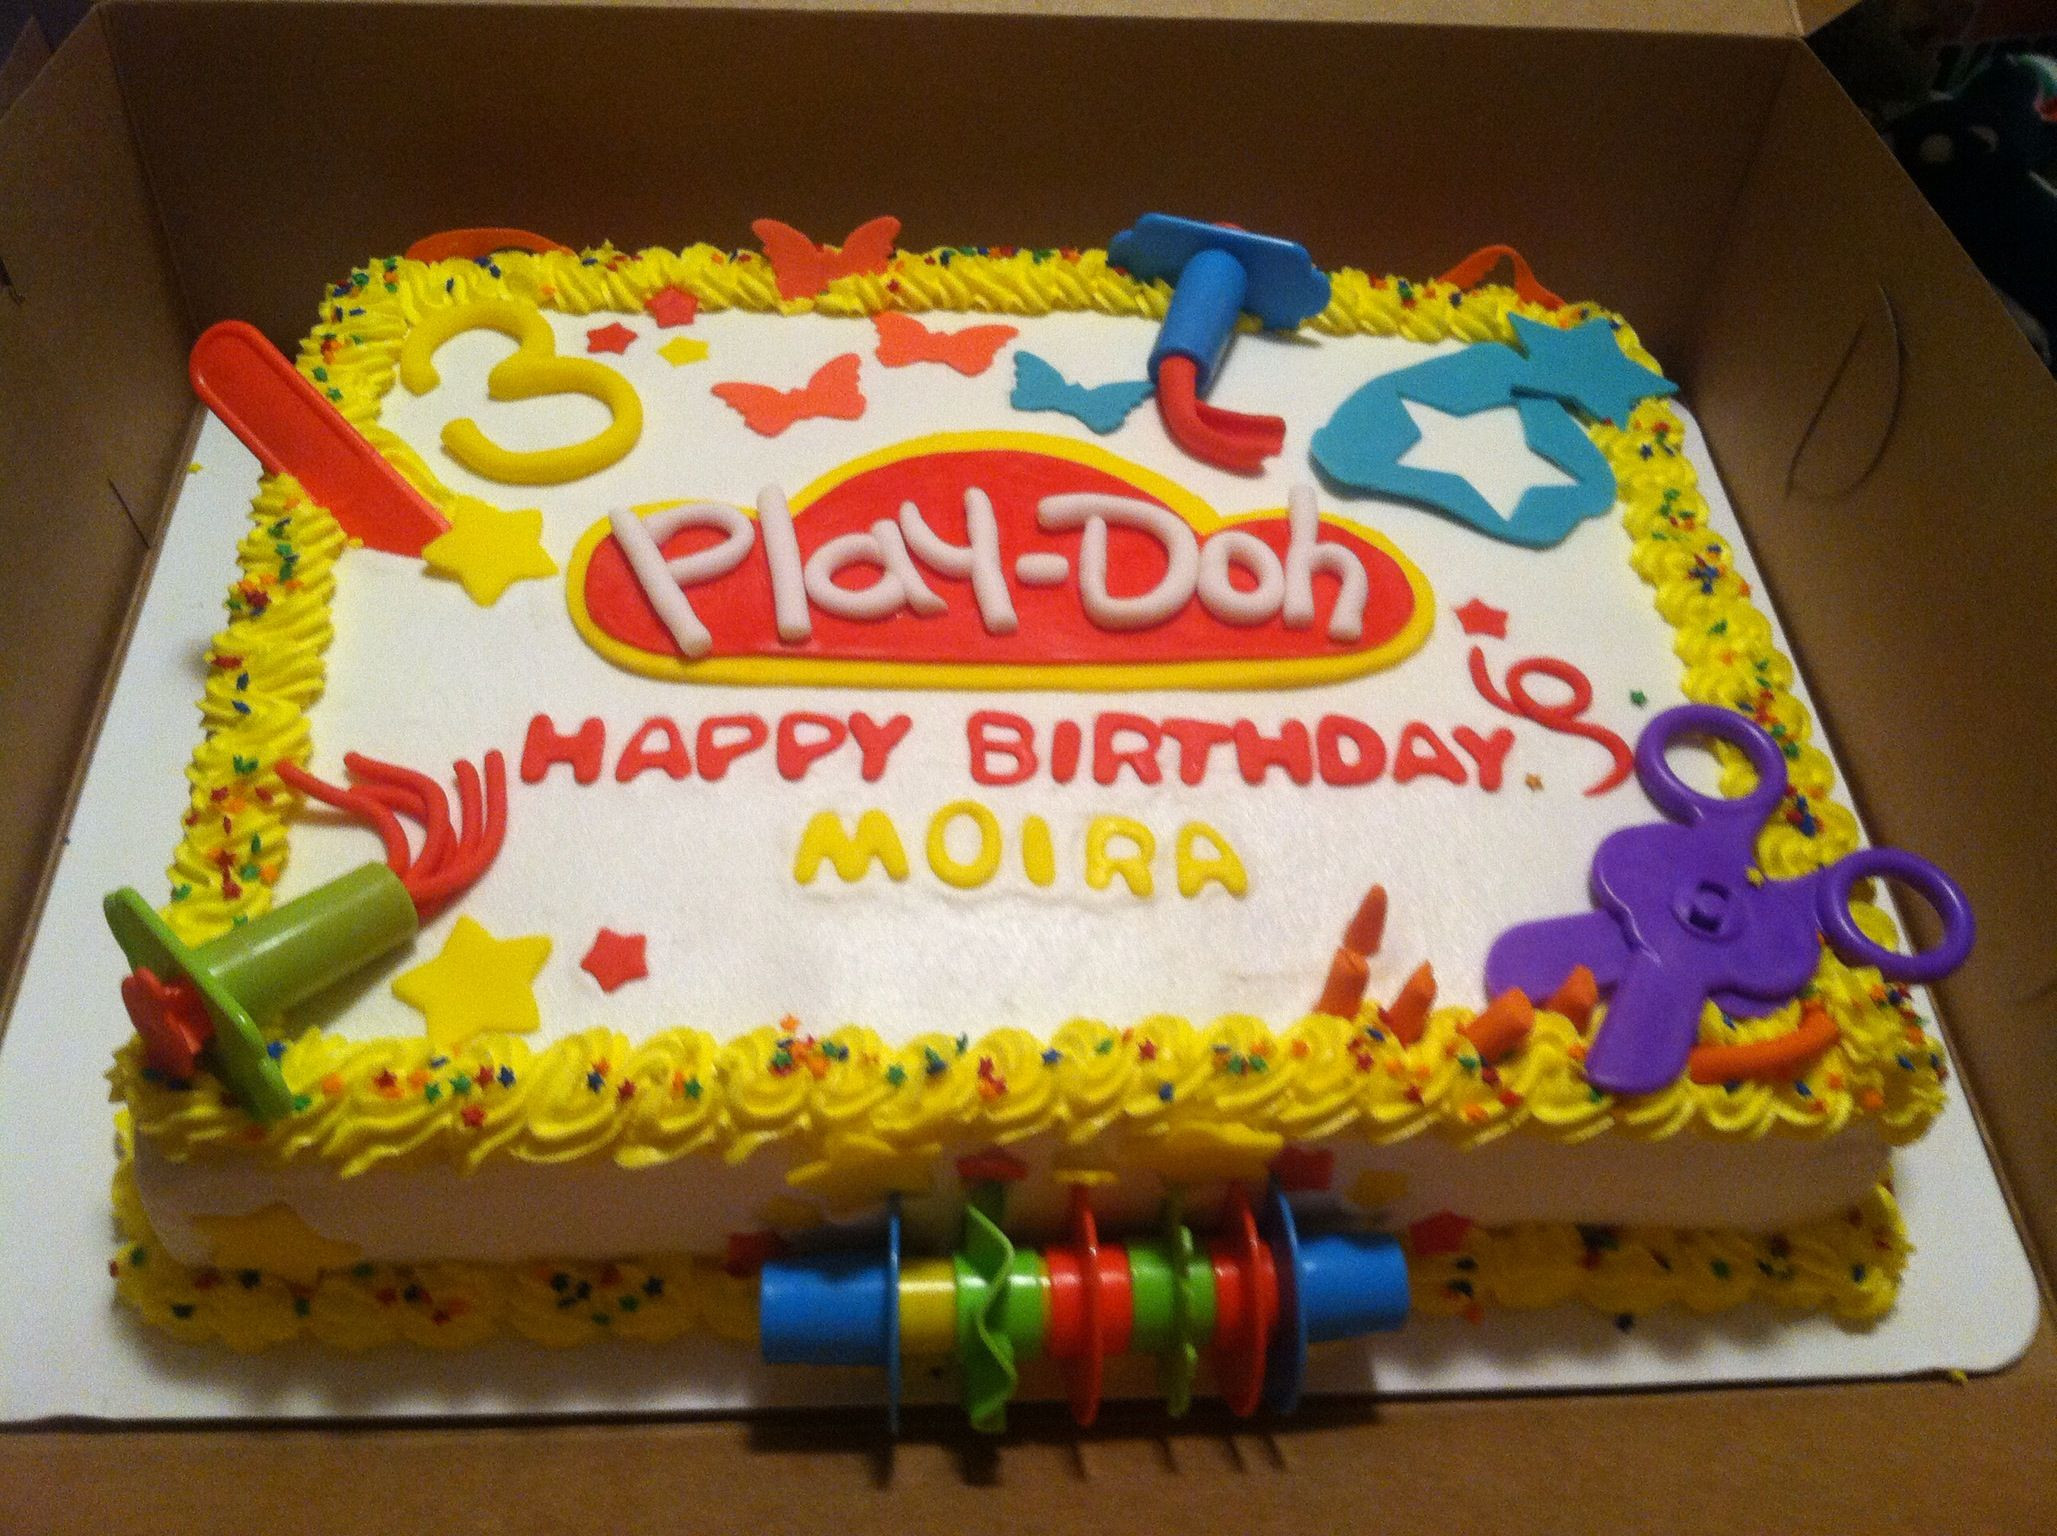 Play Doh Birthday Cake
 Play doh cake … With images